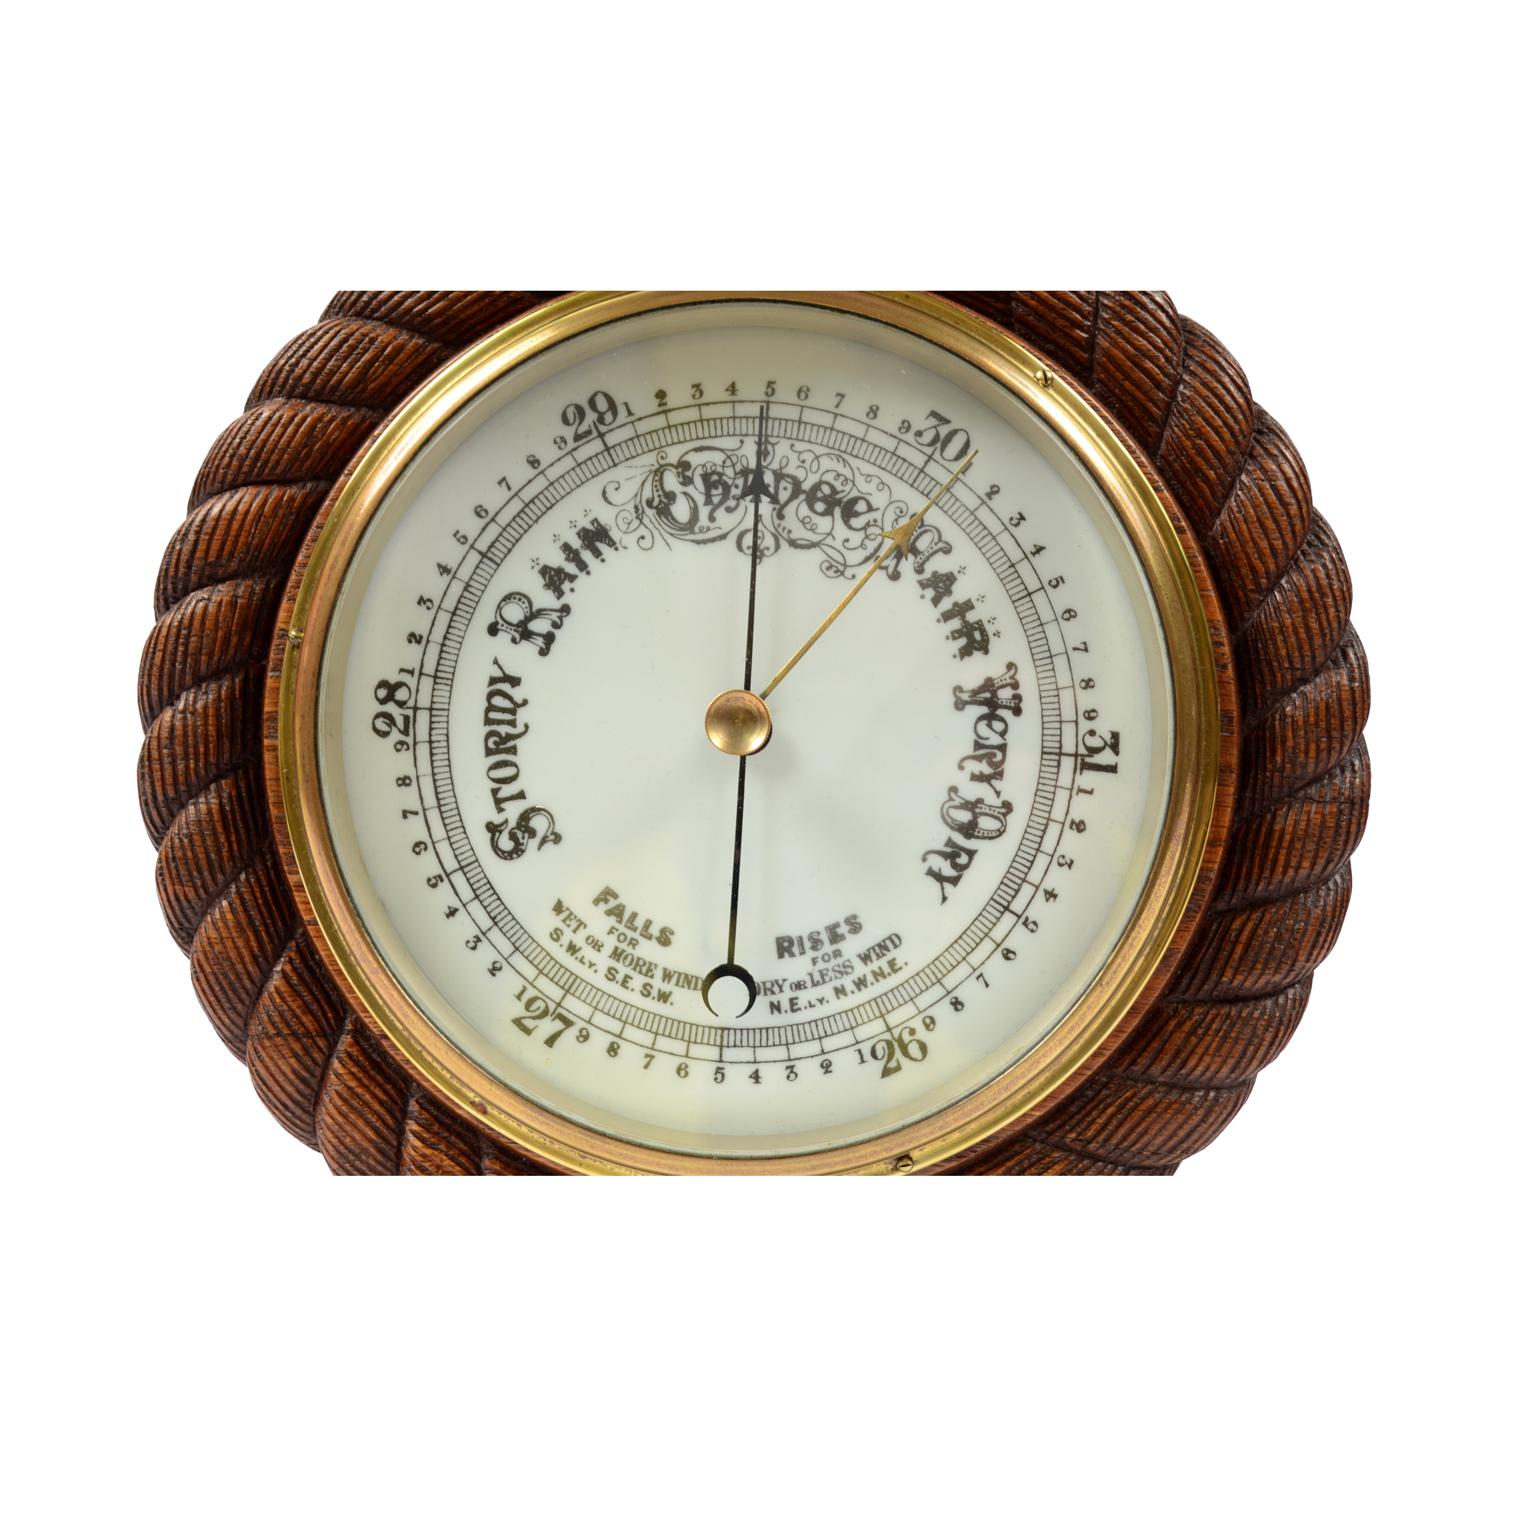 Antique English aneroid barometer made in the late 19th century, of oakwood carved like a rope, brass and glass. Very good condition. Working. Measures: Diameter 24 cm, thickness 6 cm.
Shipping in insured by Lloyd's London and the gift box is free